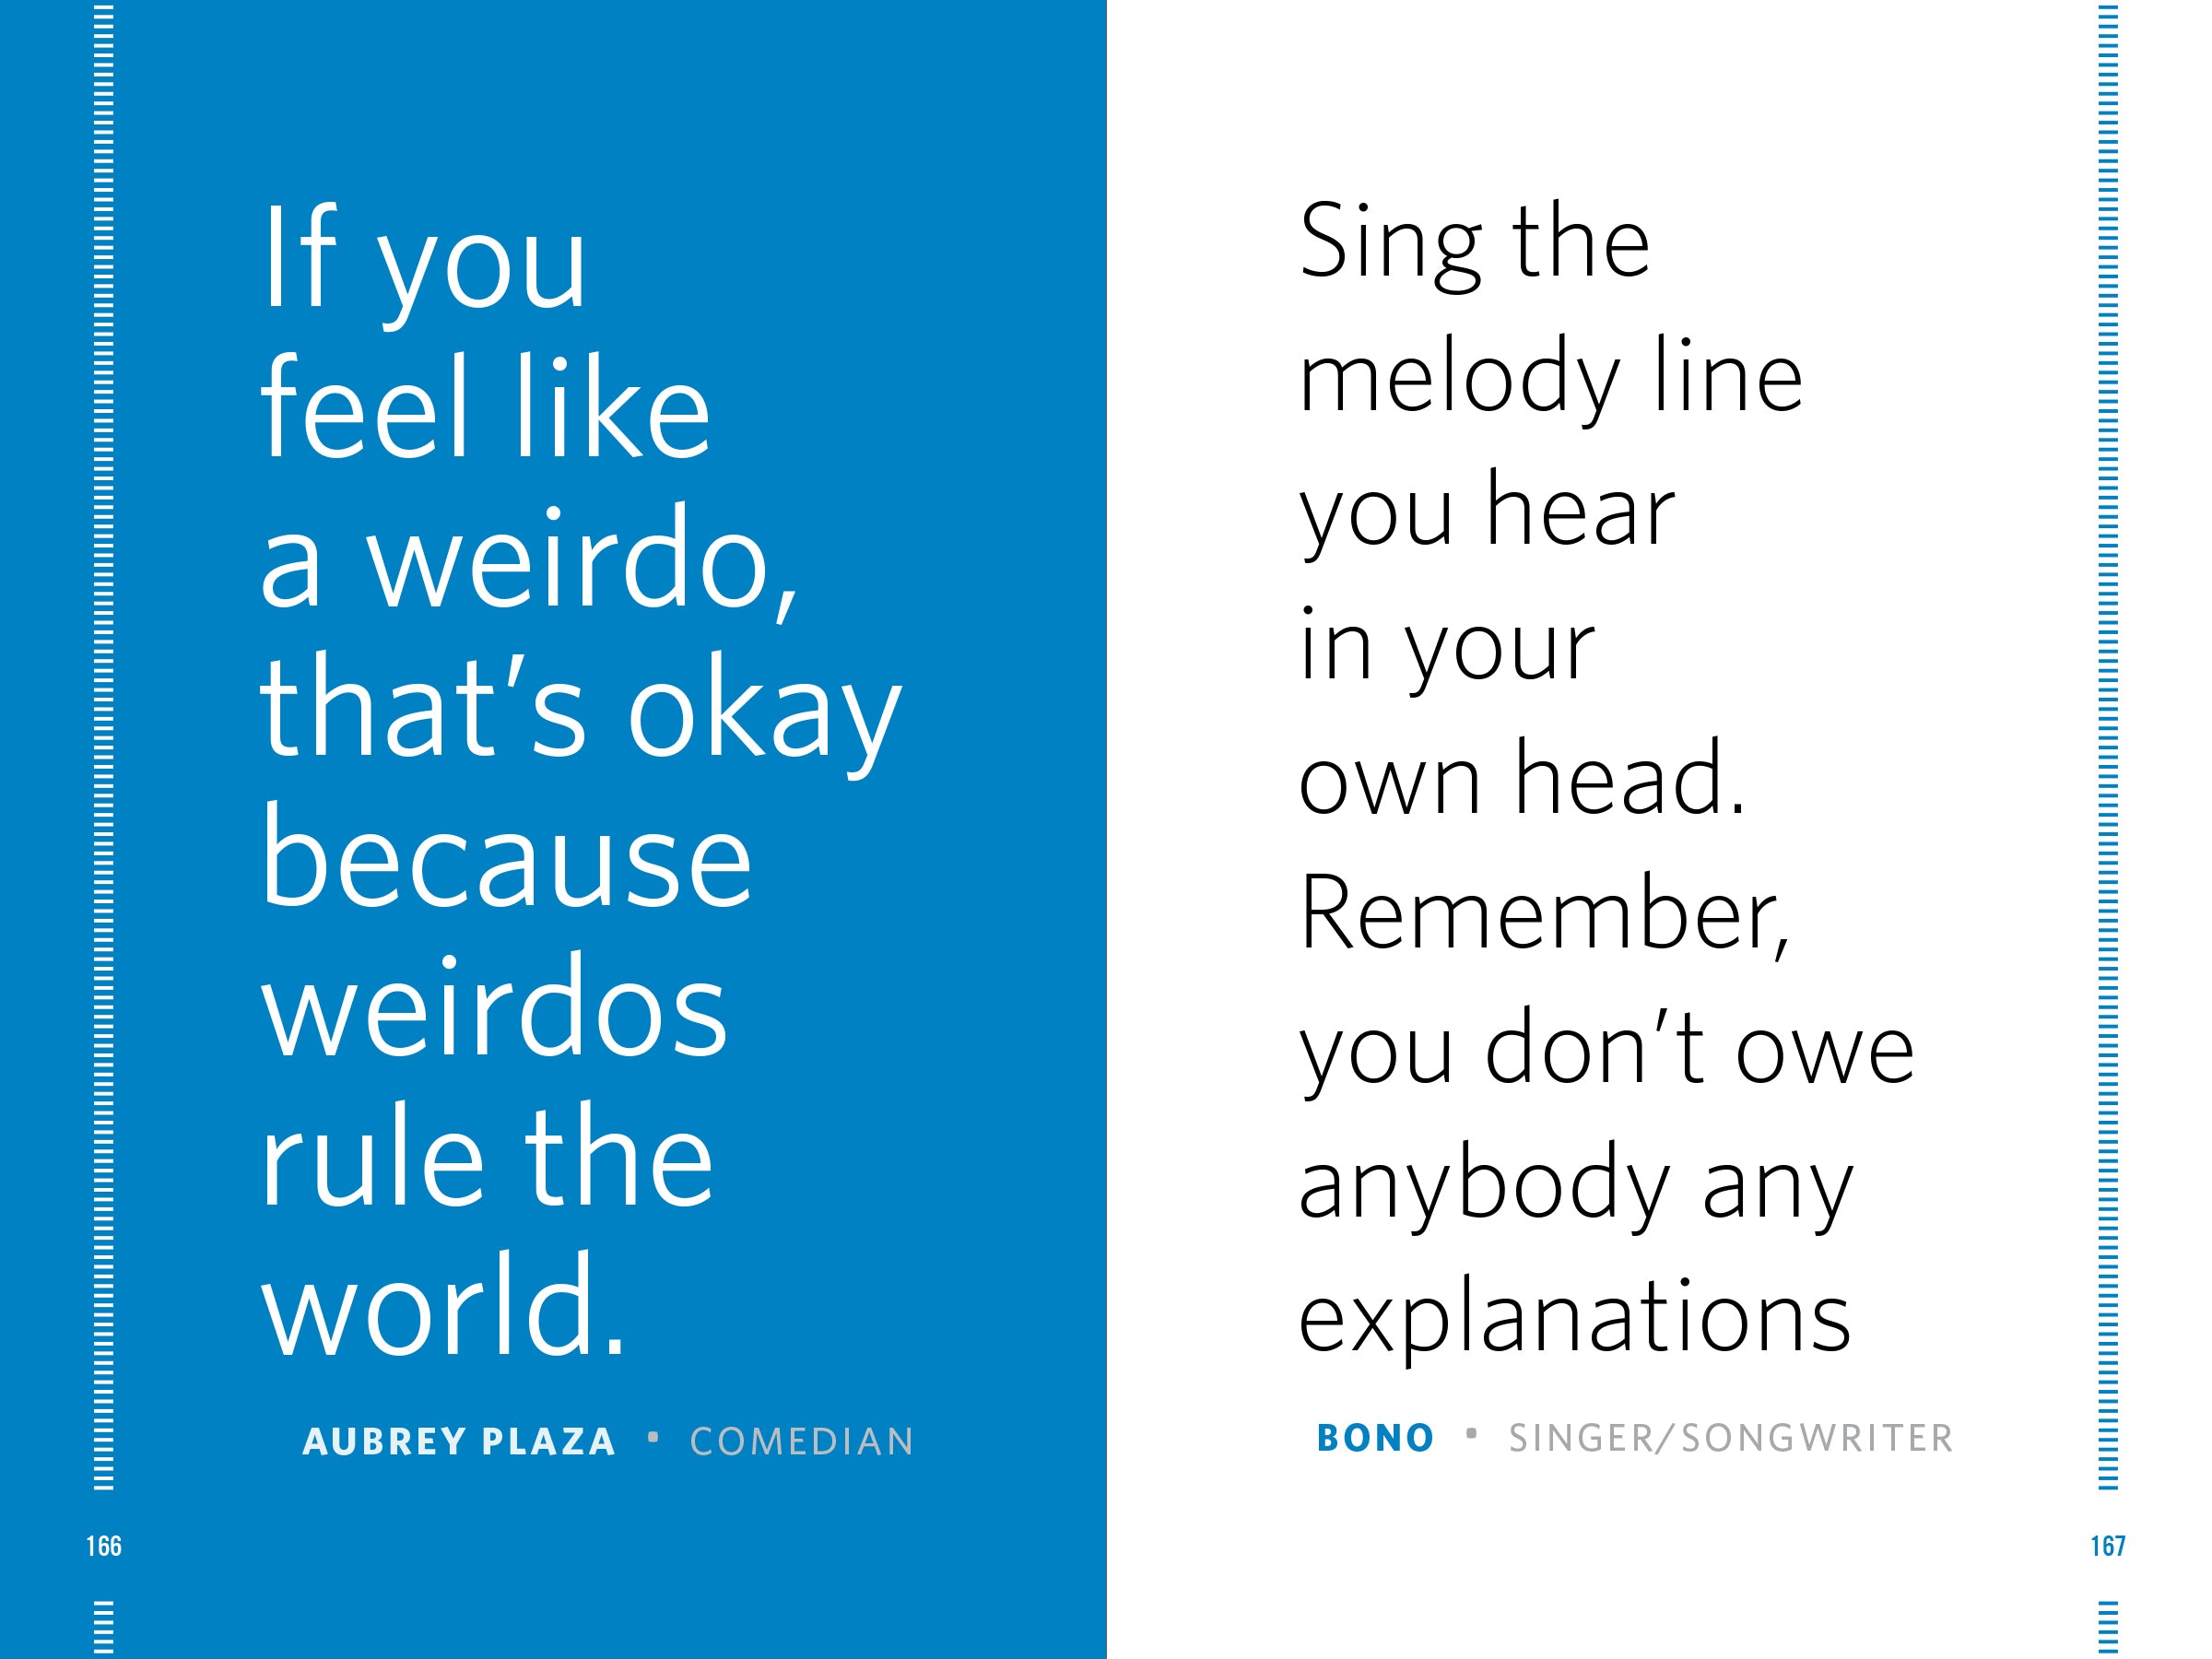 "Being Weird Is A Wonderful Thing"    